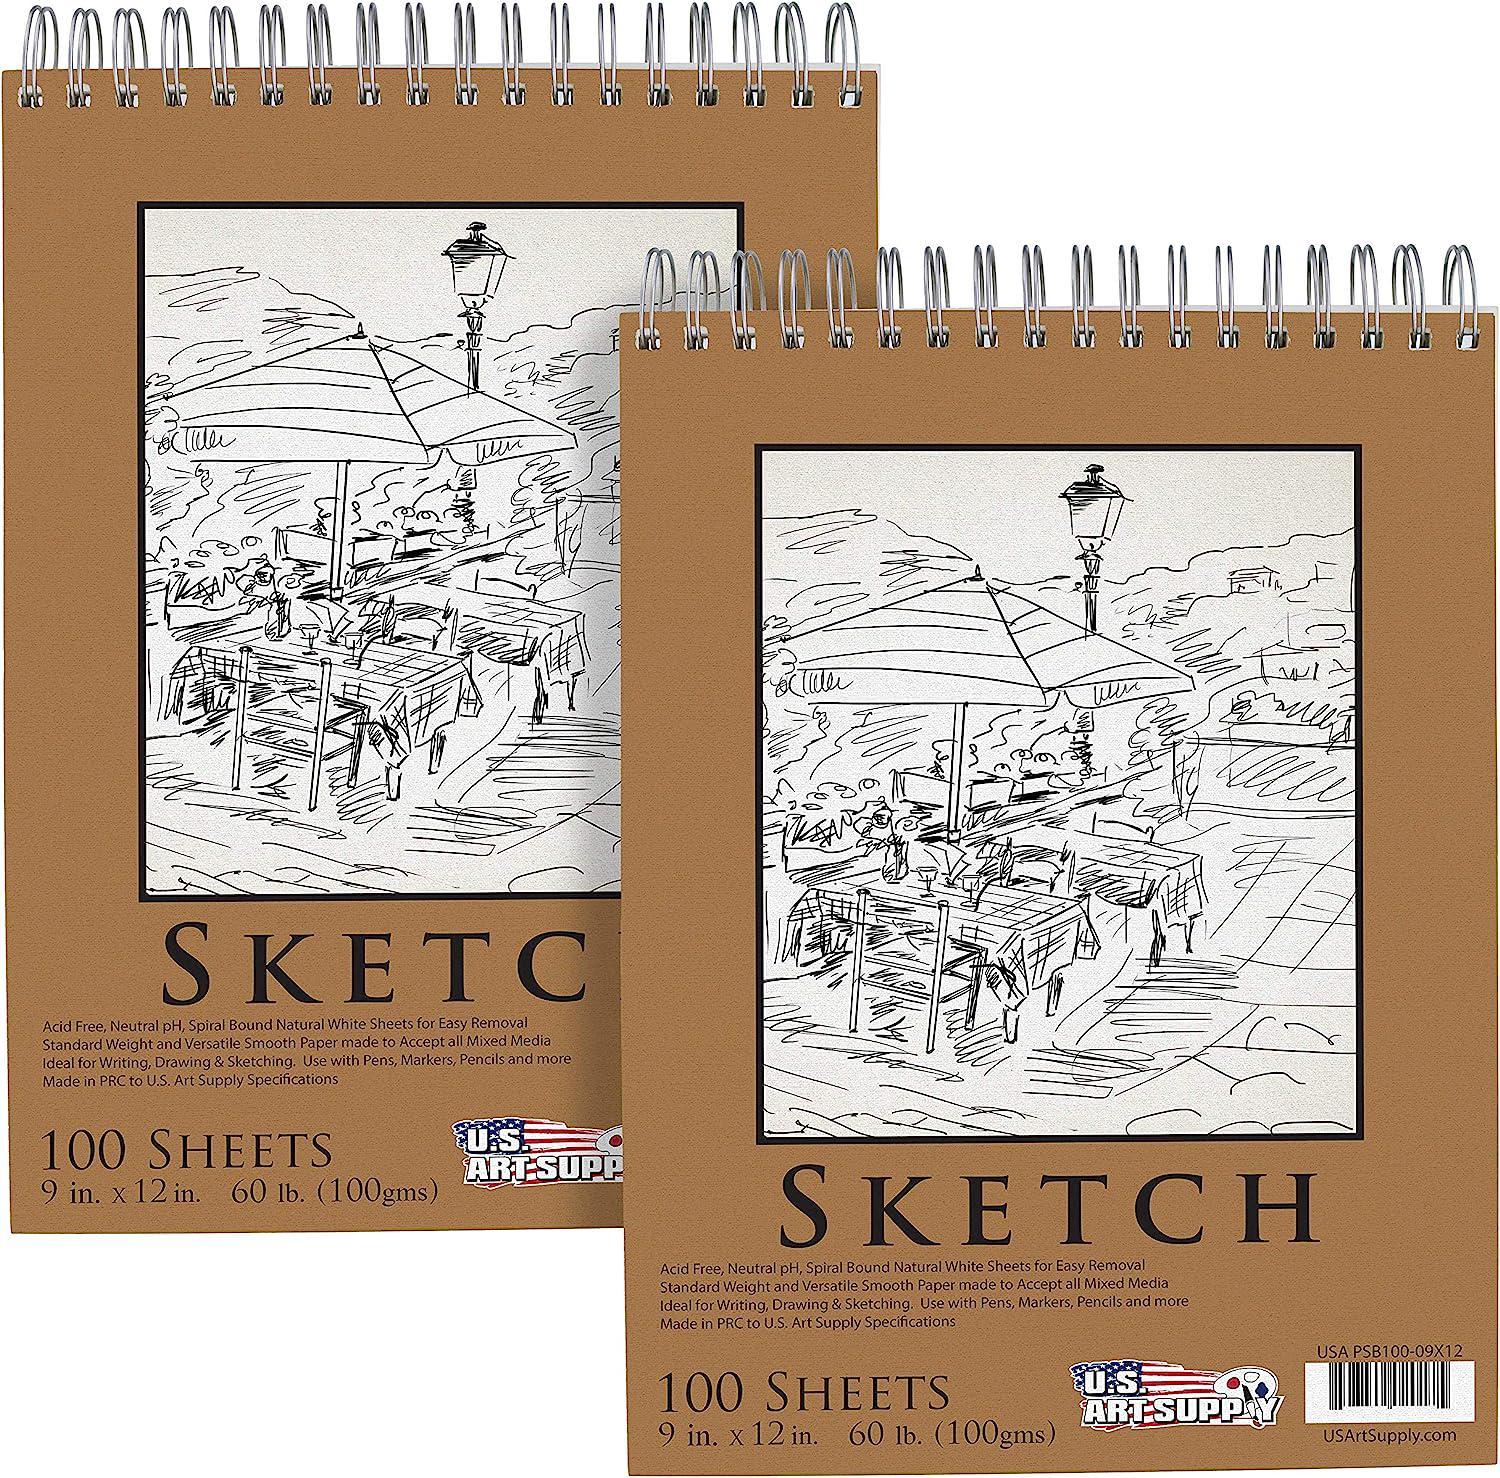 U.S. Art Supply 16 x 20 10-Sheet 8-Ounce Triple Primed Acid-Free Canvas Paper Pad (Pack of 2 Pads)